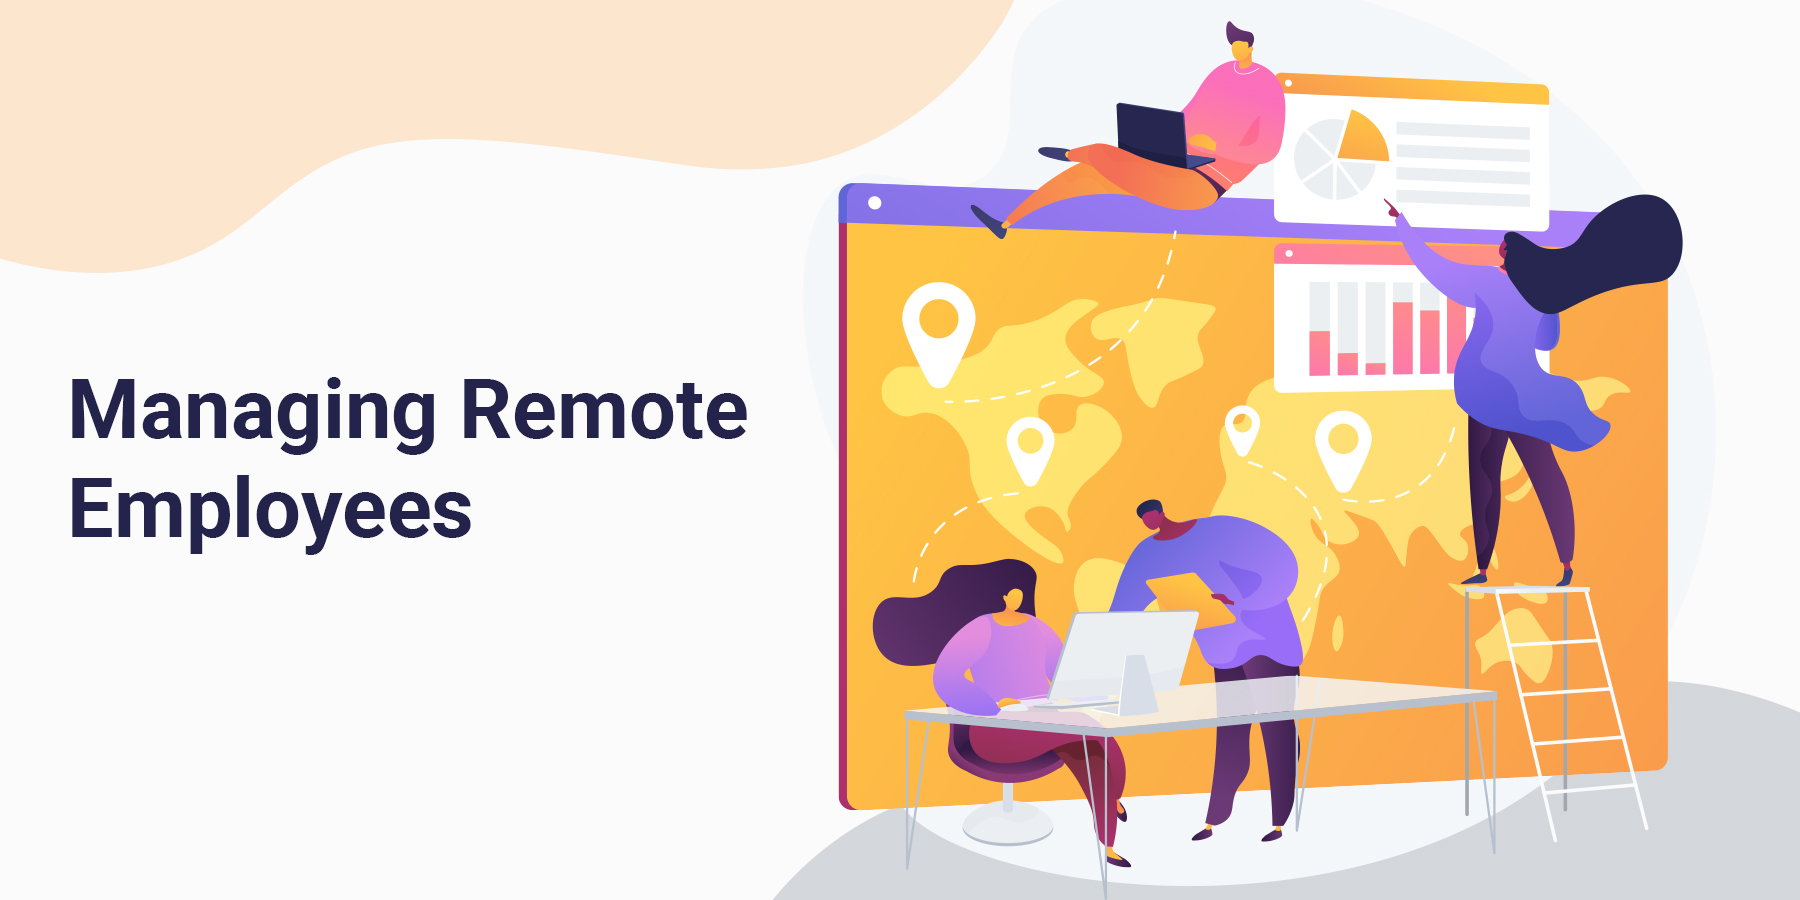 Ten Best Tips for Managing Remote Employees